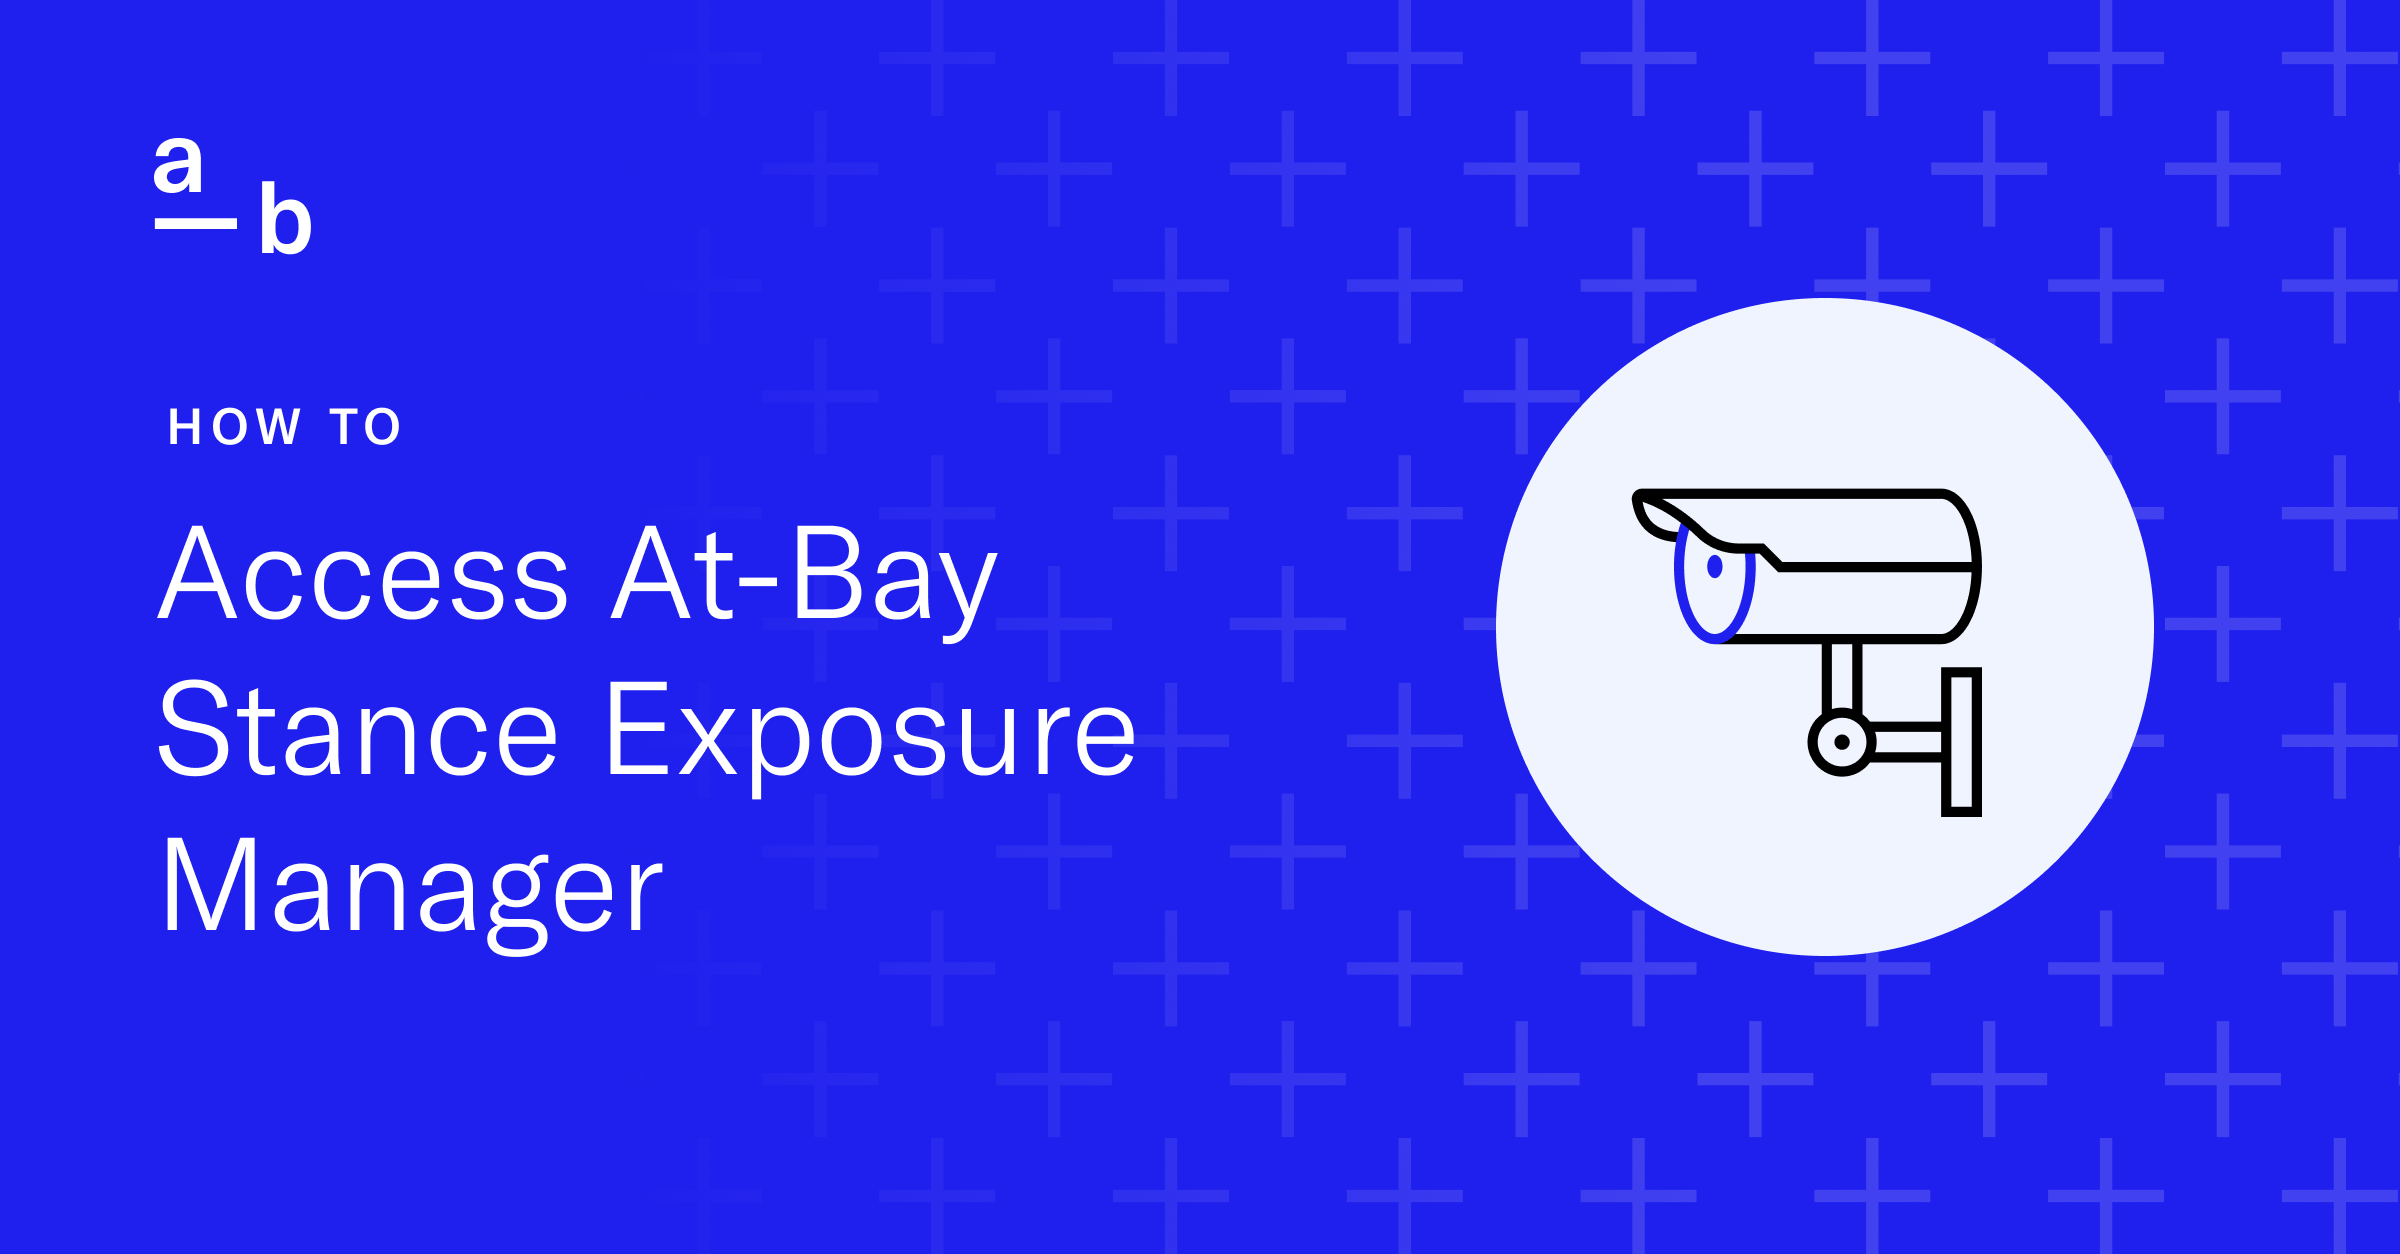 How to Access At-Bay Stance Exposure Manager